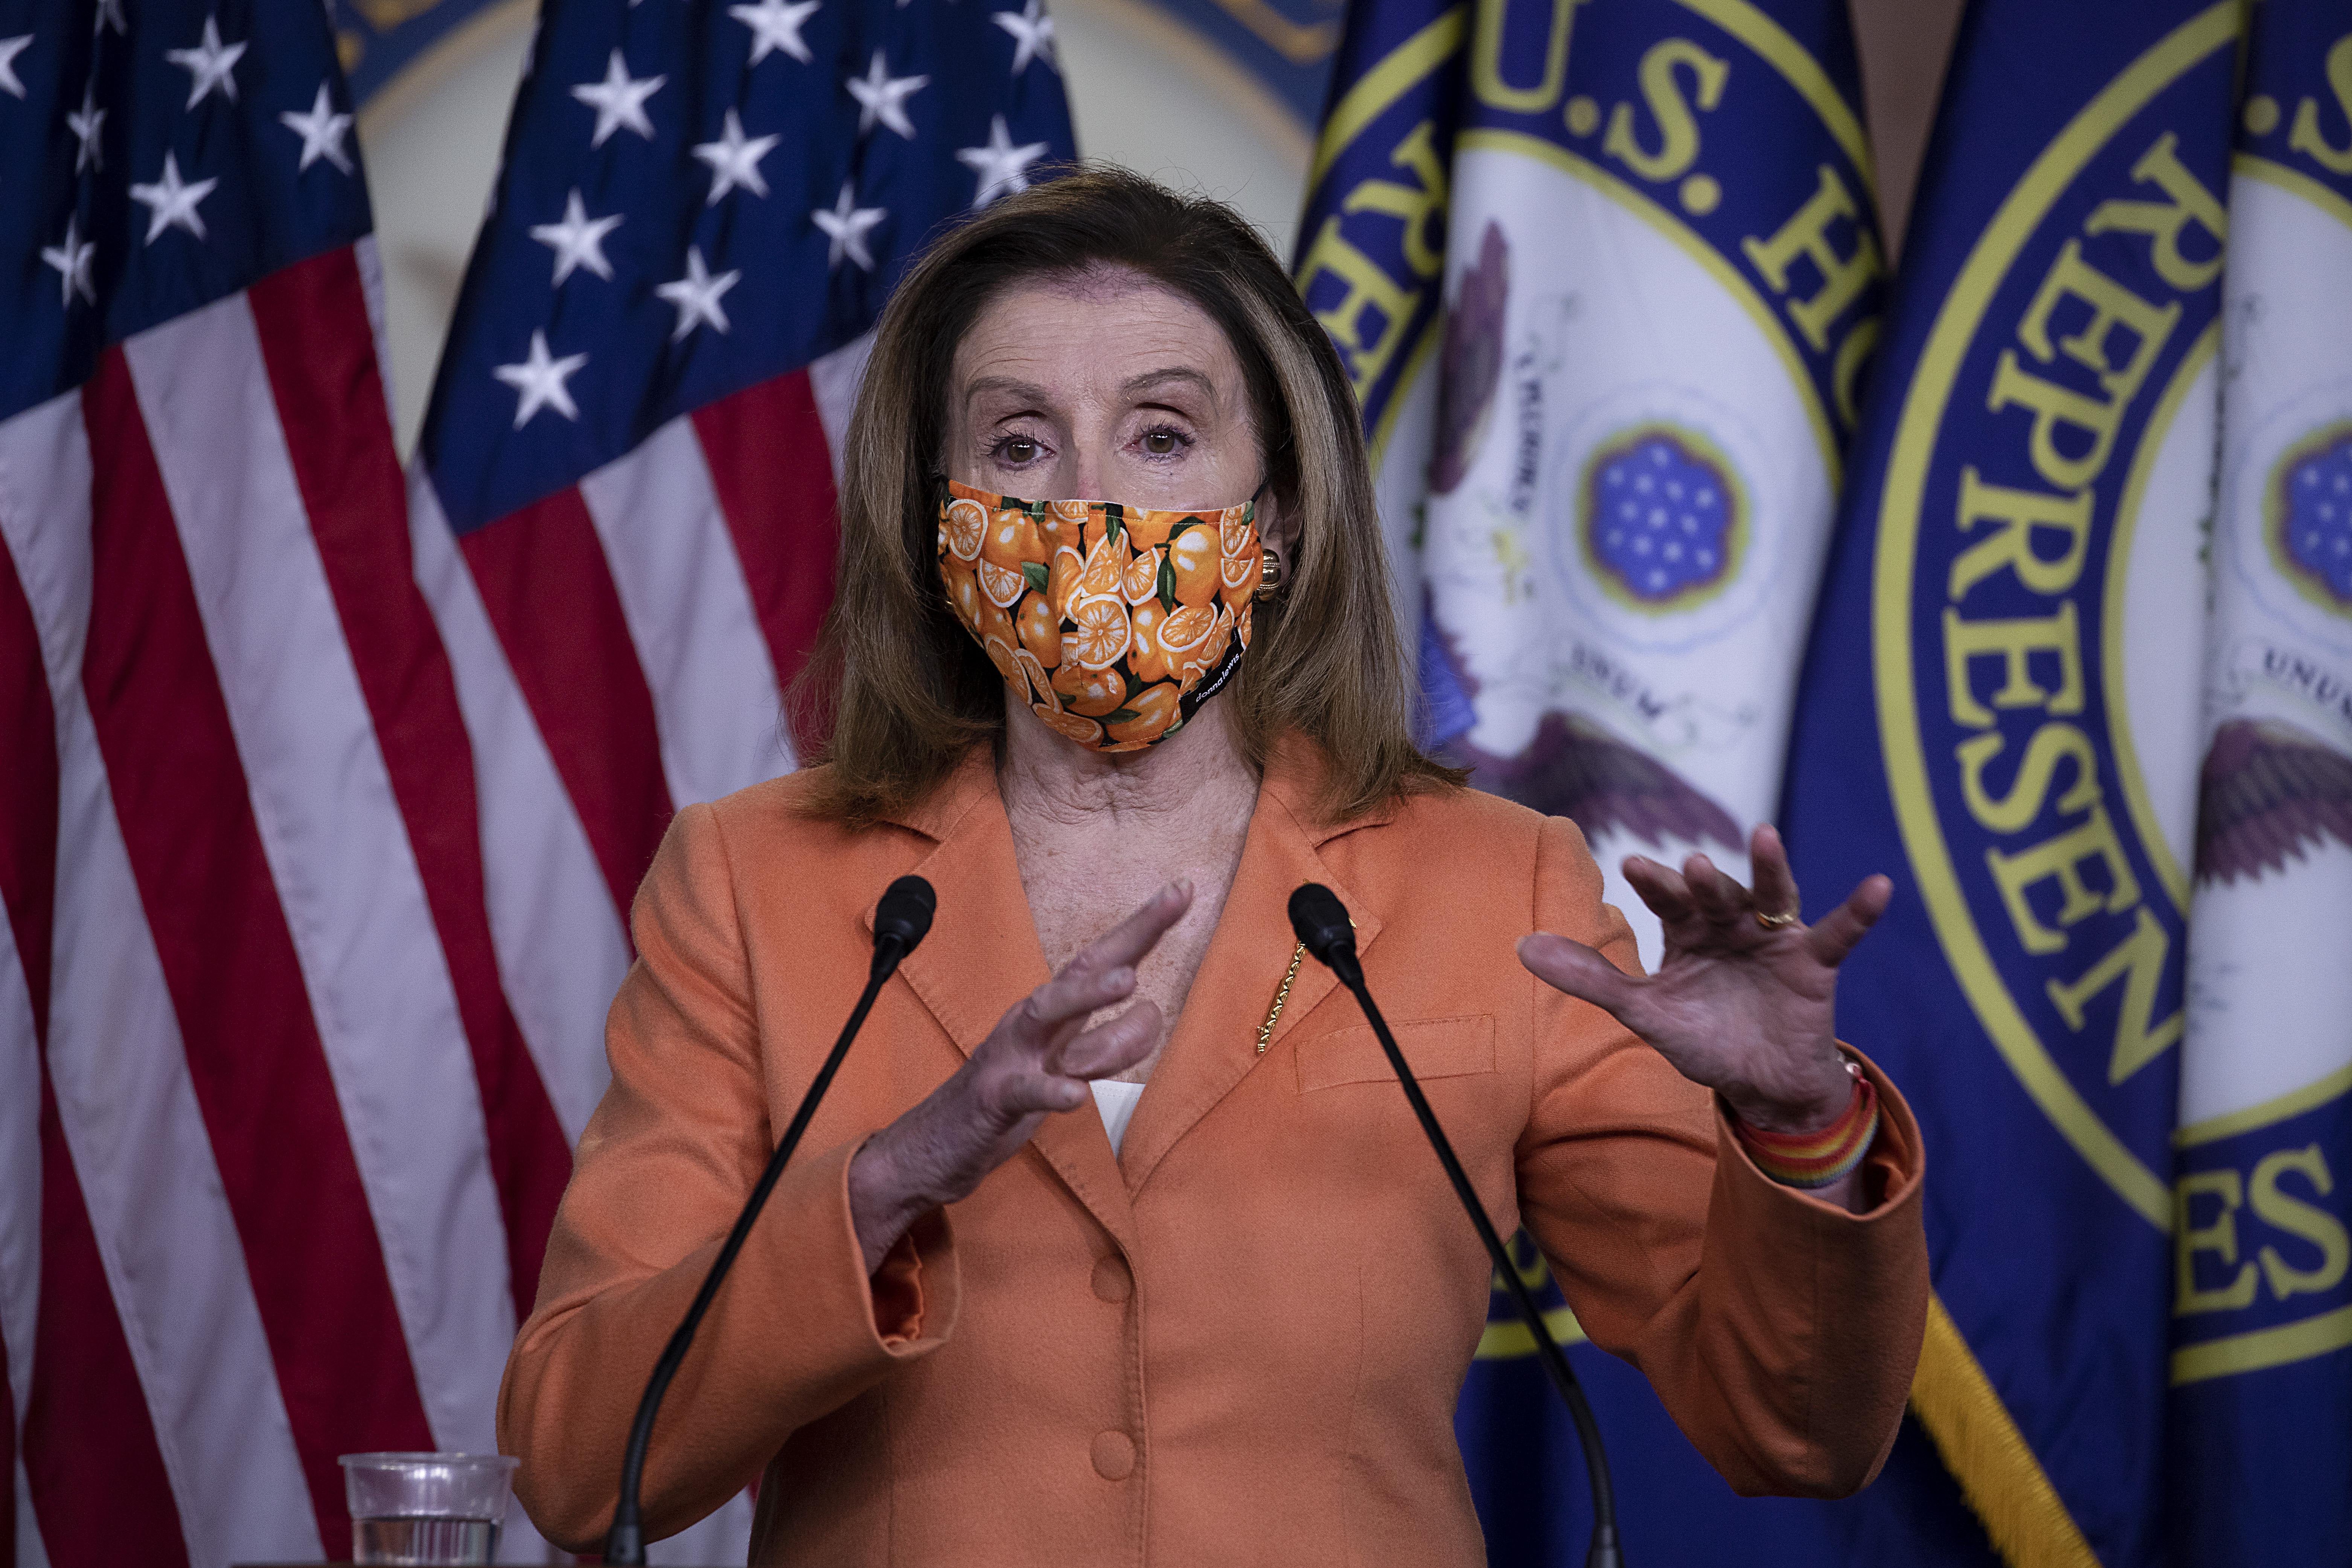 Nancy Pelosi, wearing a mask and gesturing with her hands, speaks at a press conference on Capitol Hill on Thursday